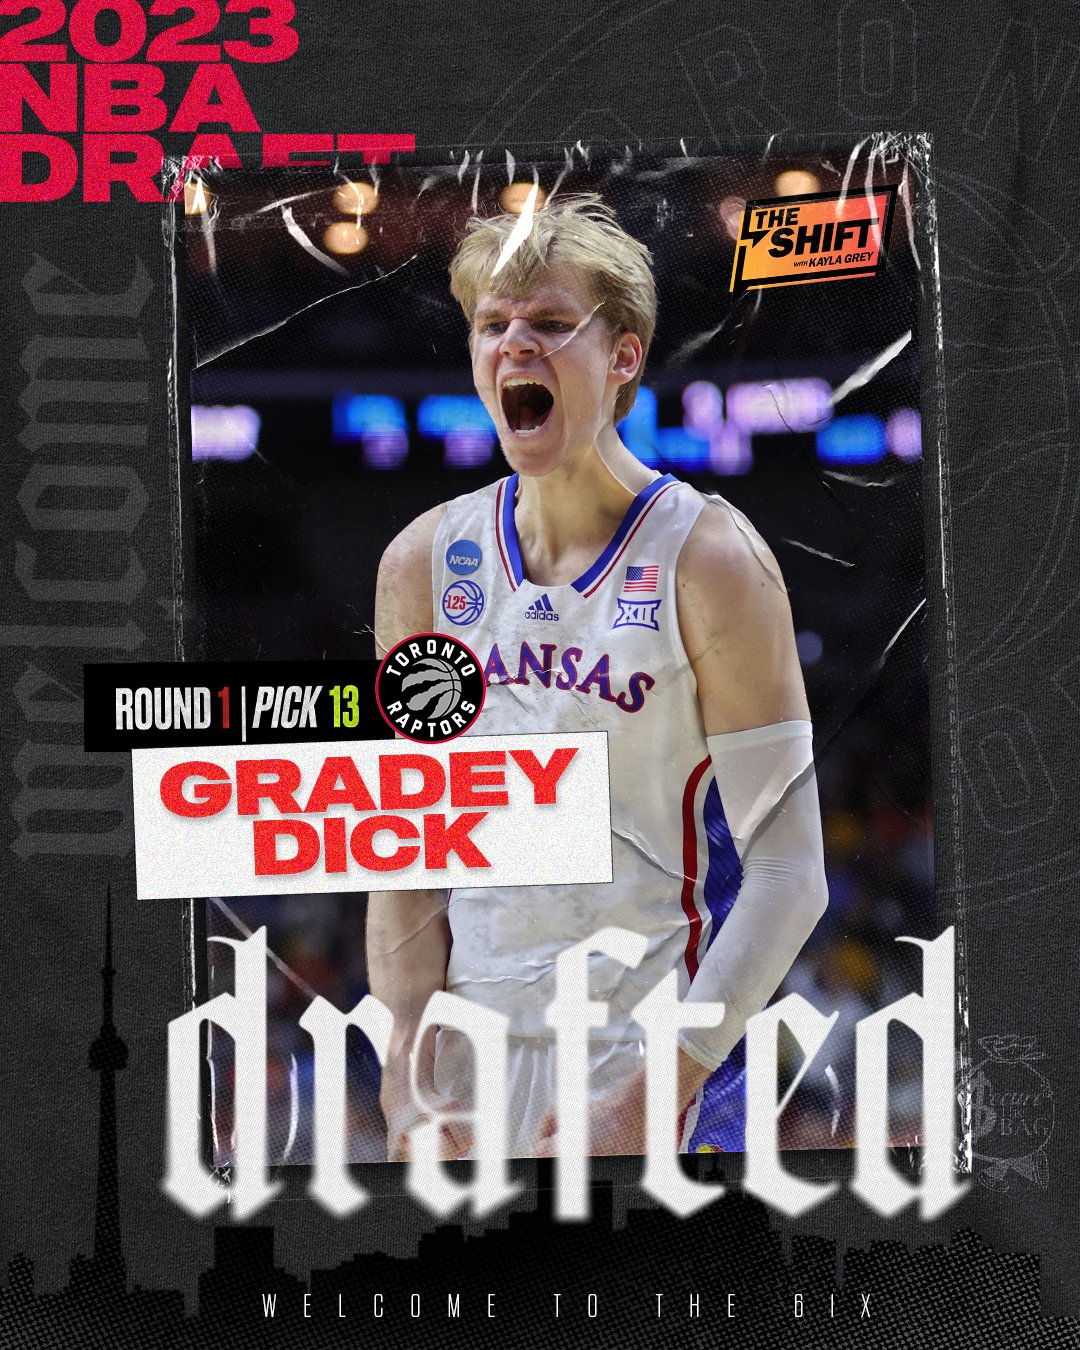 Wichita native Gradey Dick drafted by Toronto Raptors in first